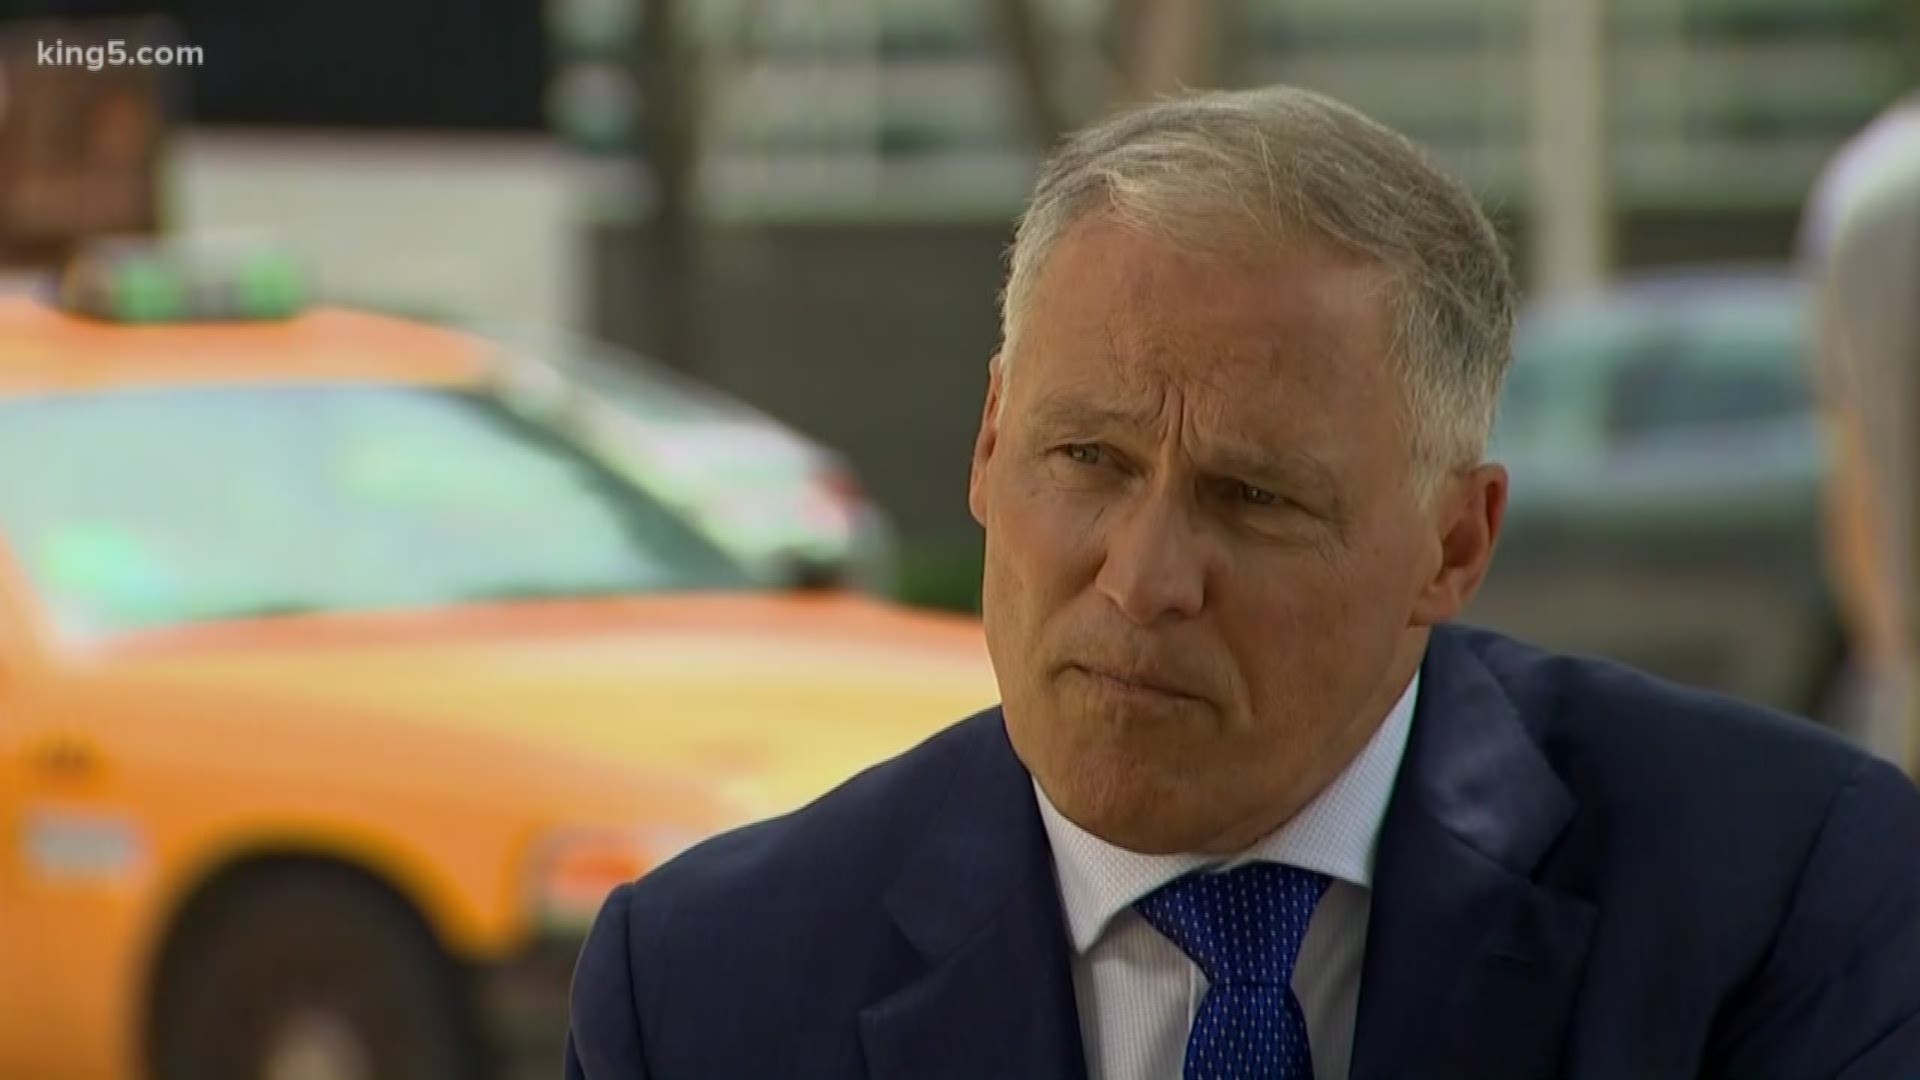 All eyes are on Miami for the Democratic debates. KING 5 political reporter Chris Daniels had an exclusive interview with Washington's governor, Jay Inslee, as he prepares for the rest of the campaign trail.